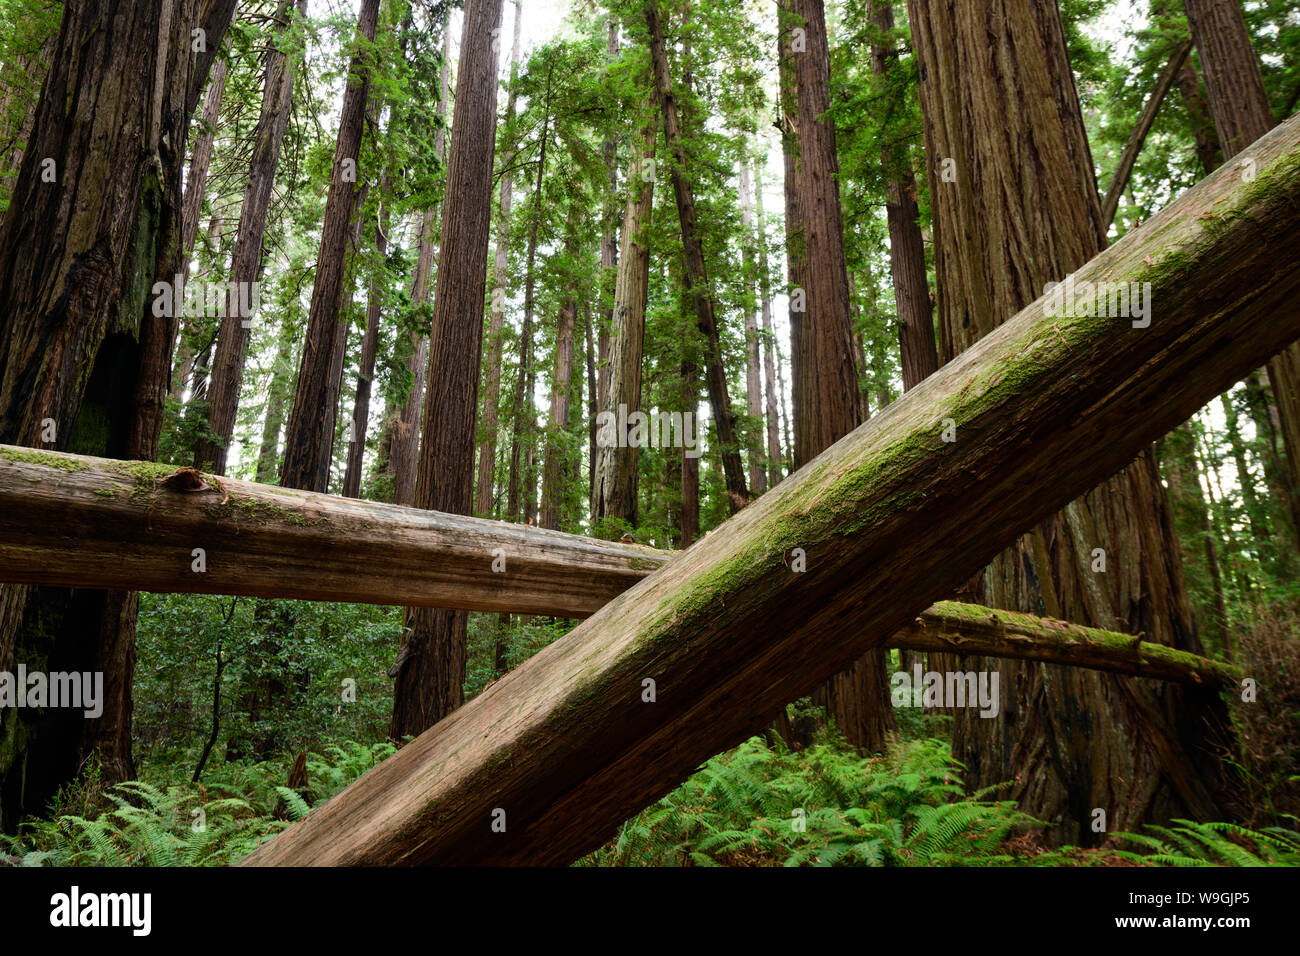 The Cheatham Grove of ancient redwood trees near Crescent City, California is where the speeder chase scenes from Return of the Jedi were filmed. Stock Photo